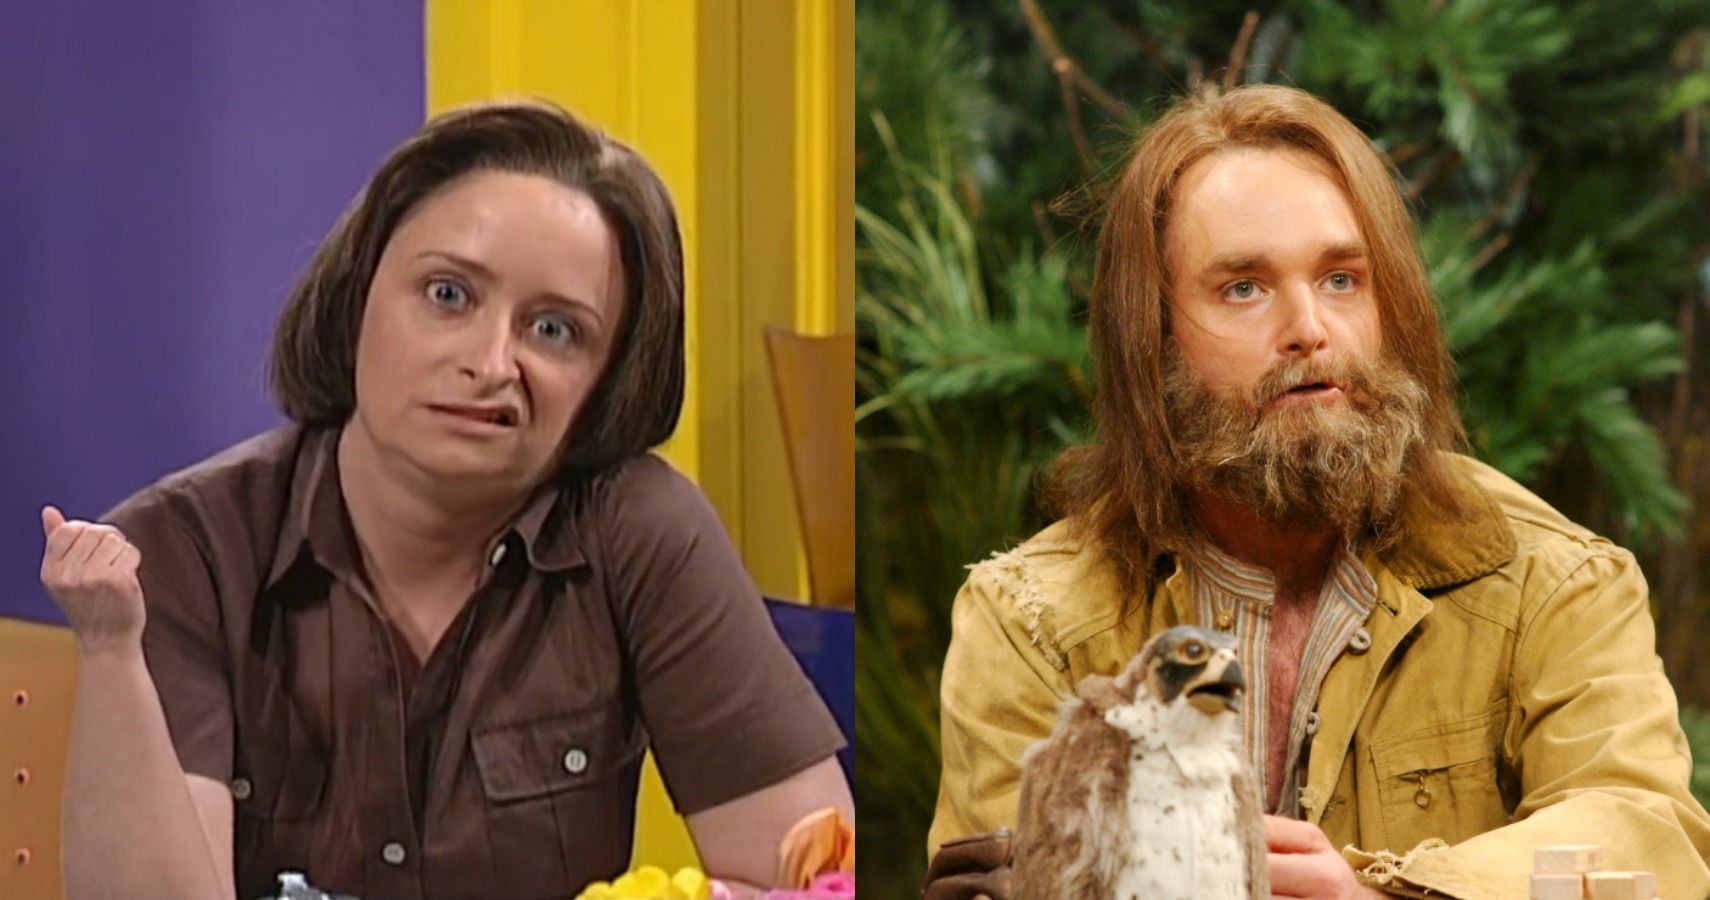 A collage of Debbie Downer and The Falconer from Saturday Night Live